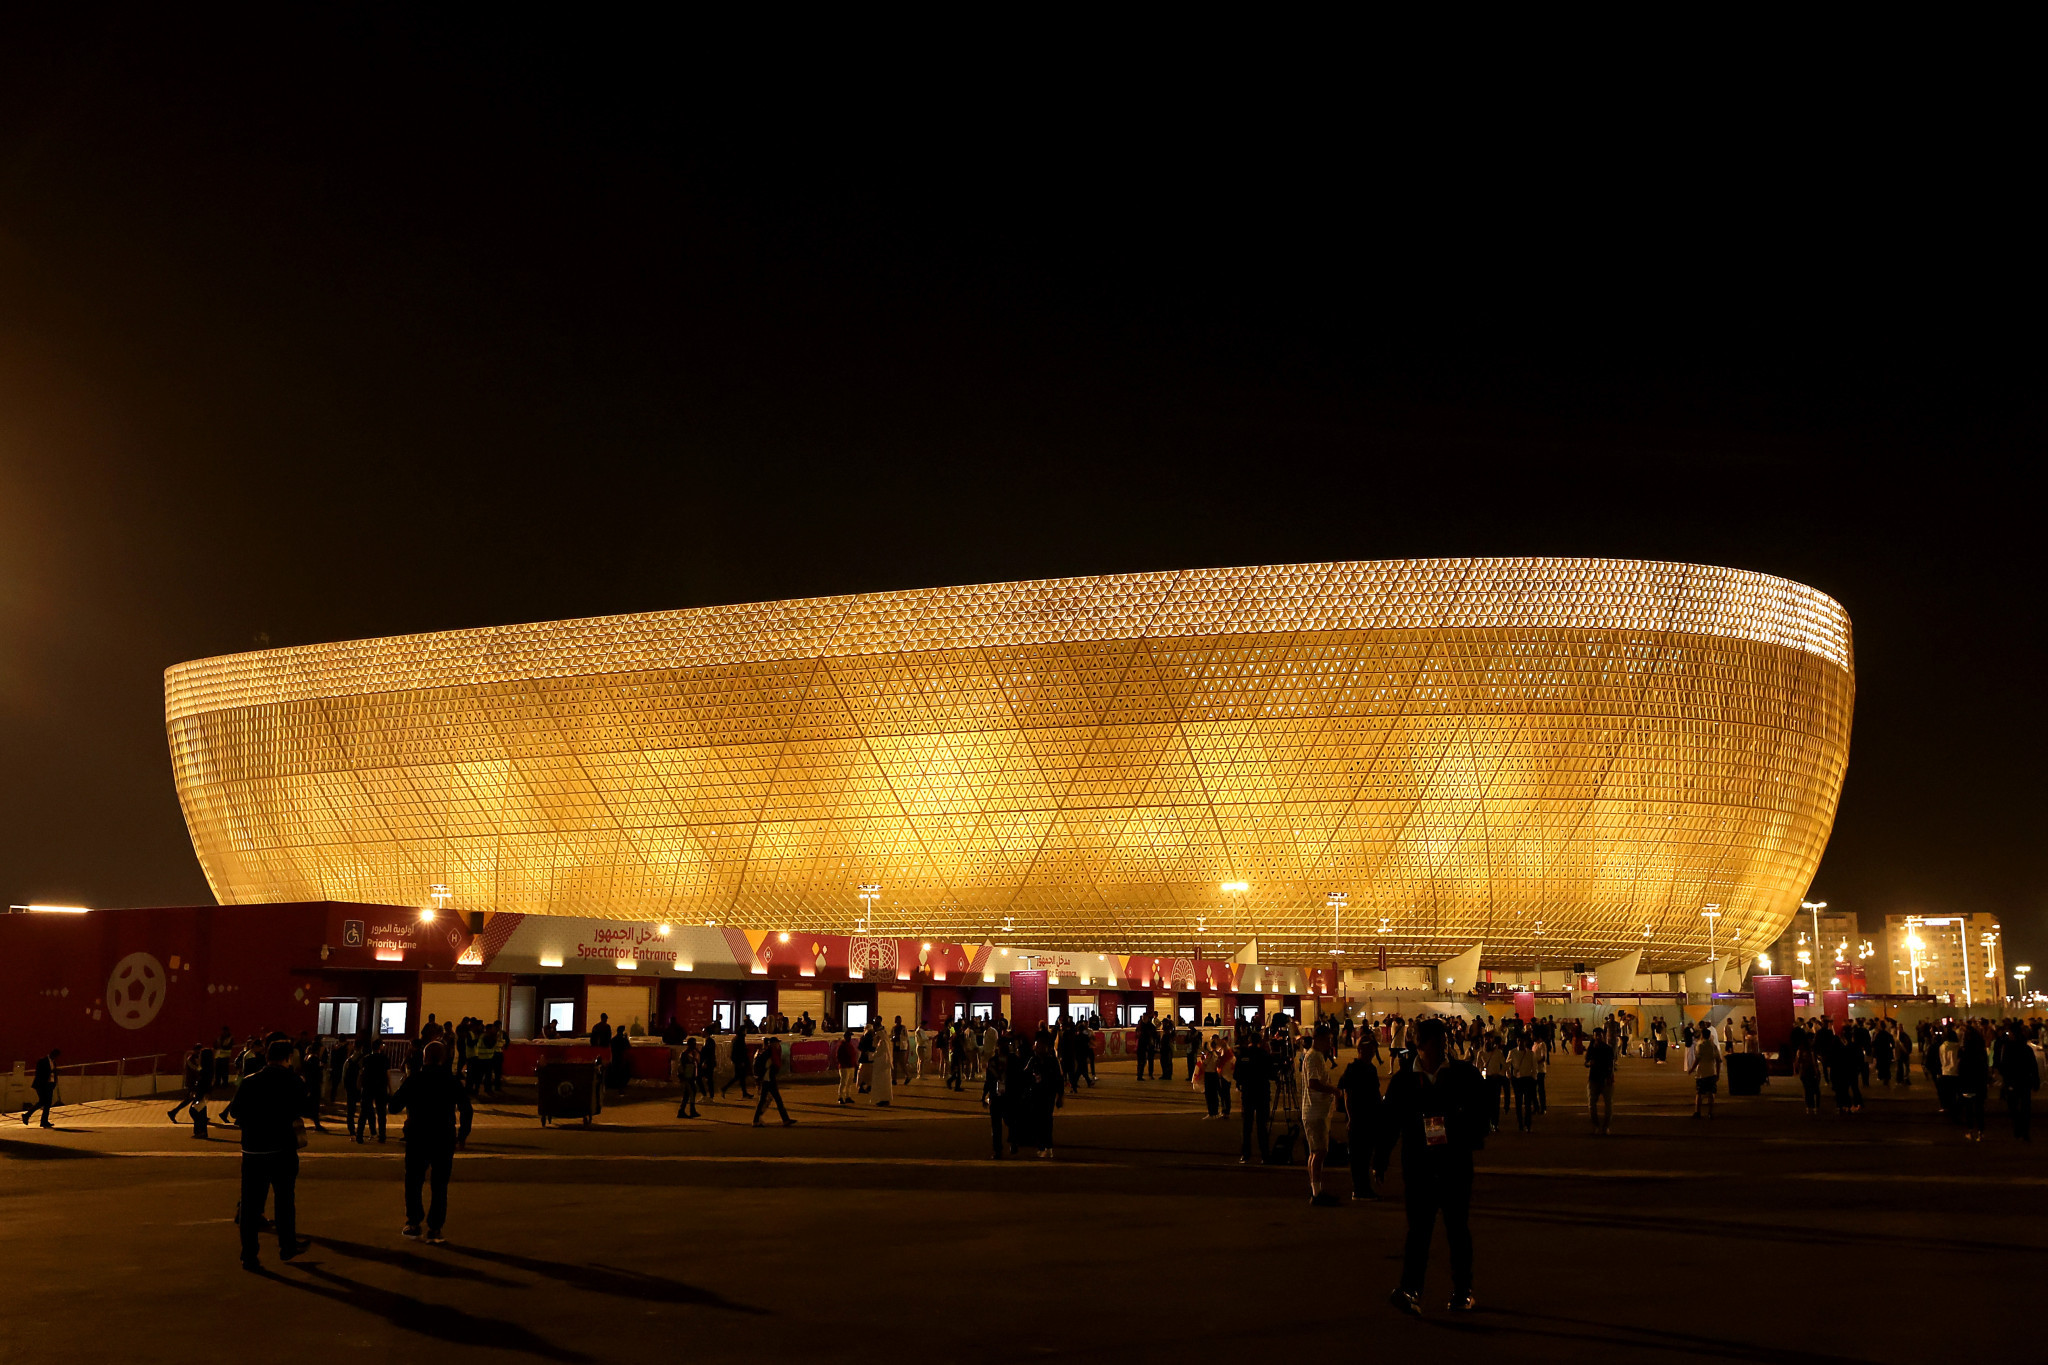 The incident happened at the Lusail Stadium which is due to stage the FIFA World Cup final ©Getty Images